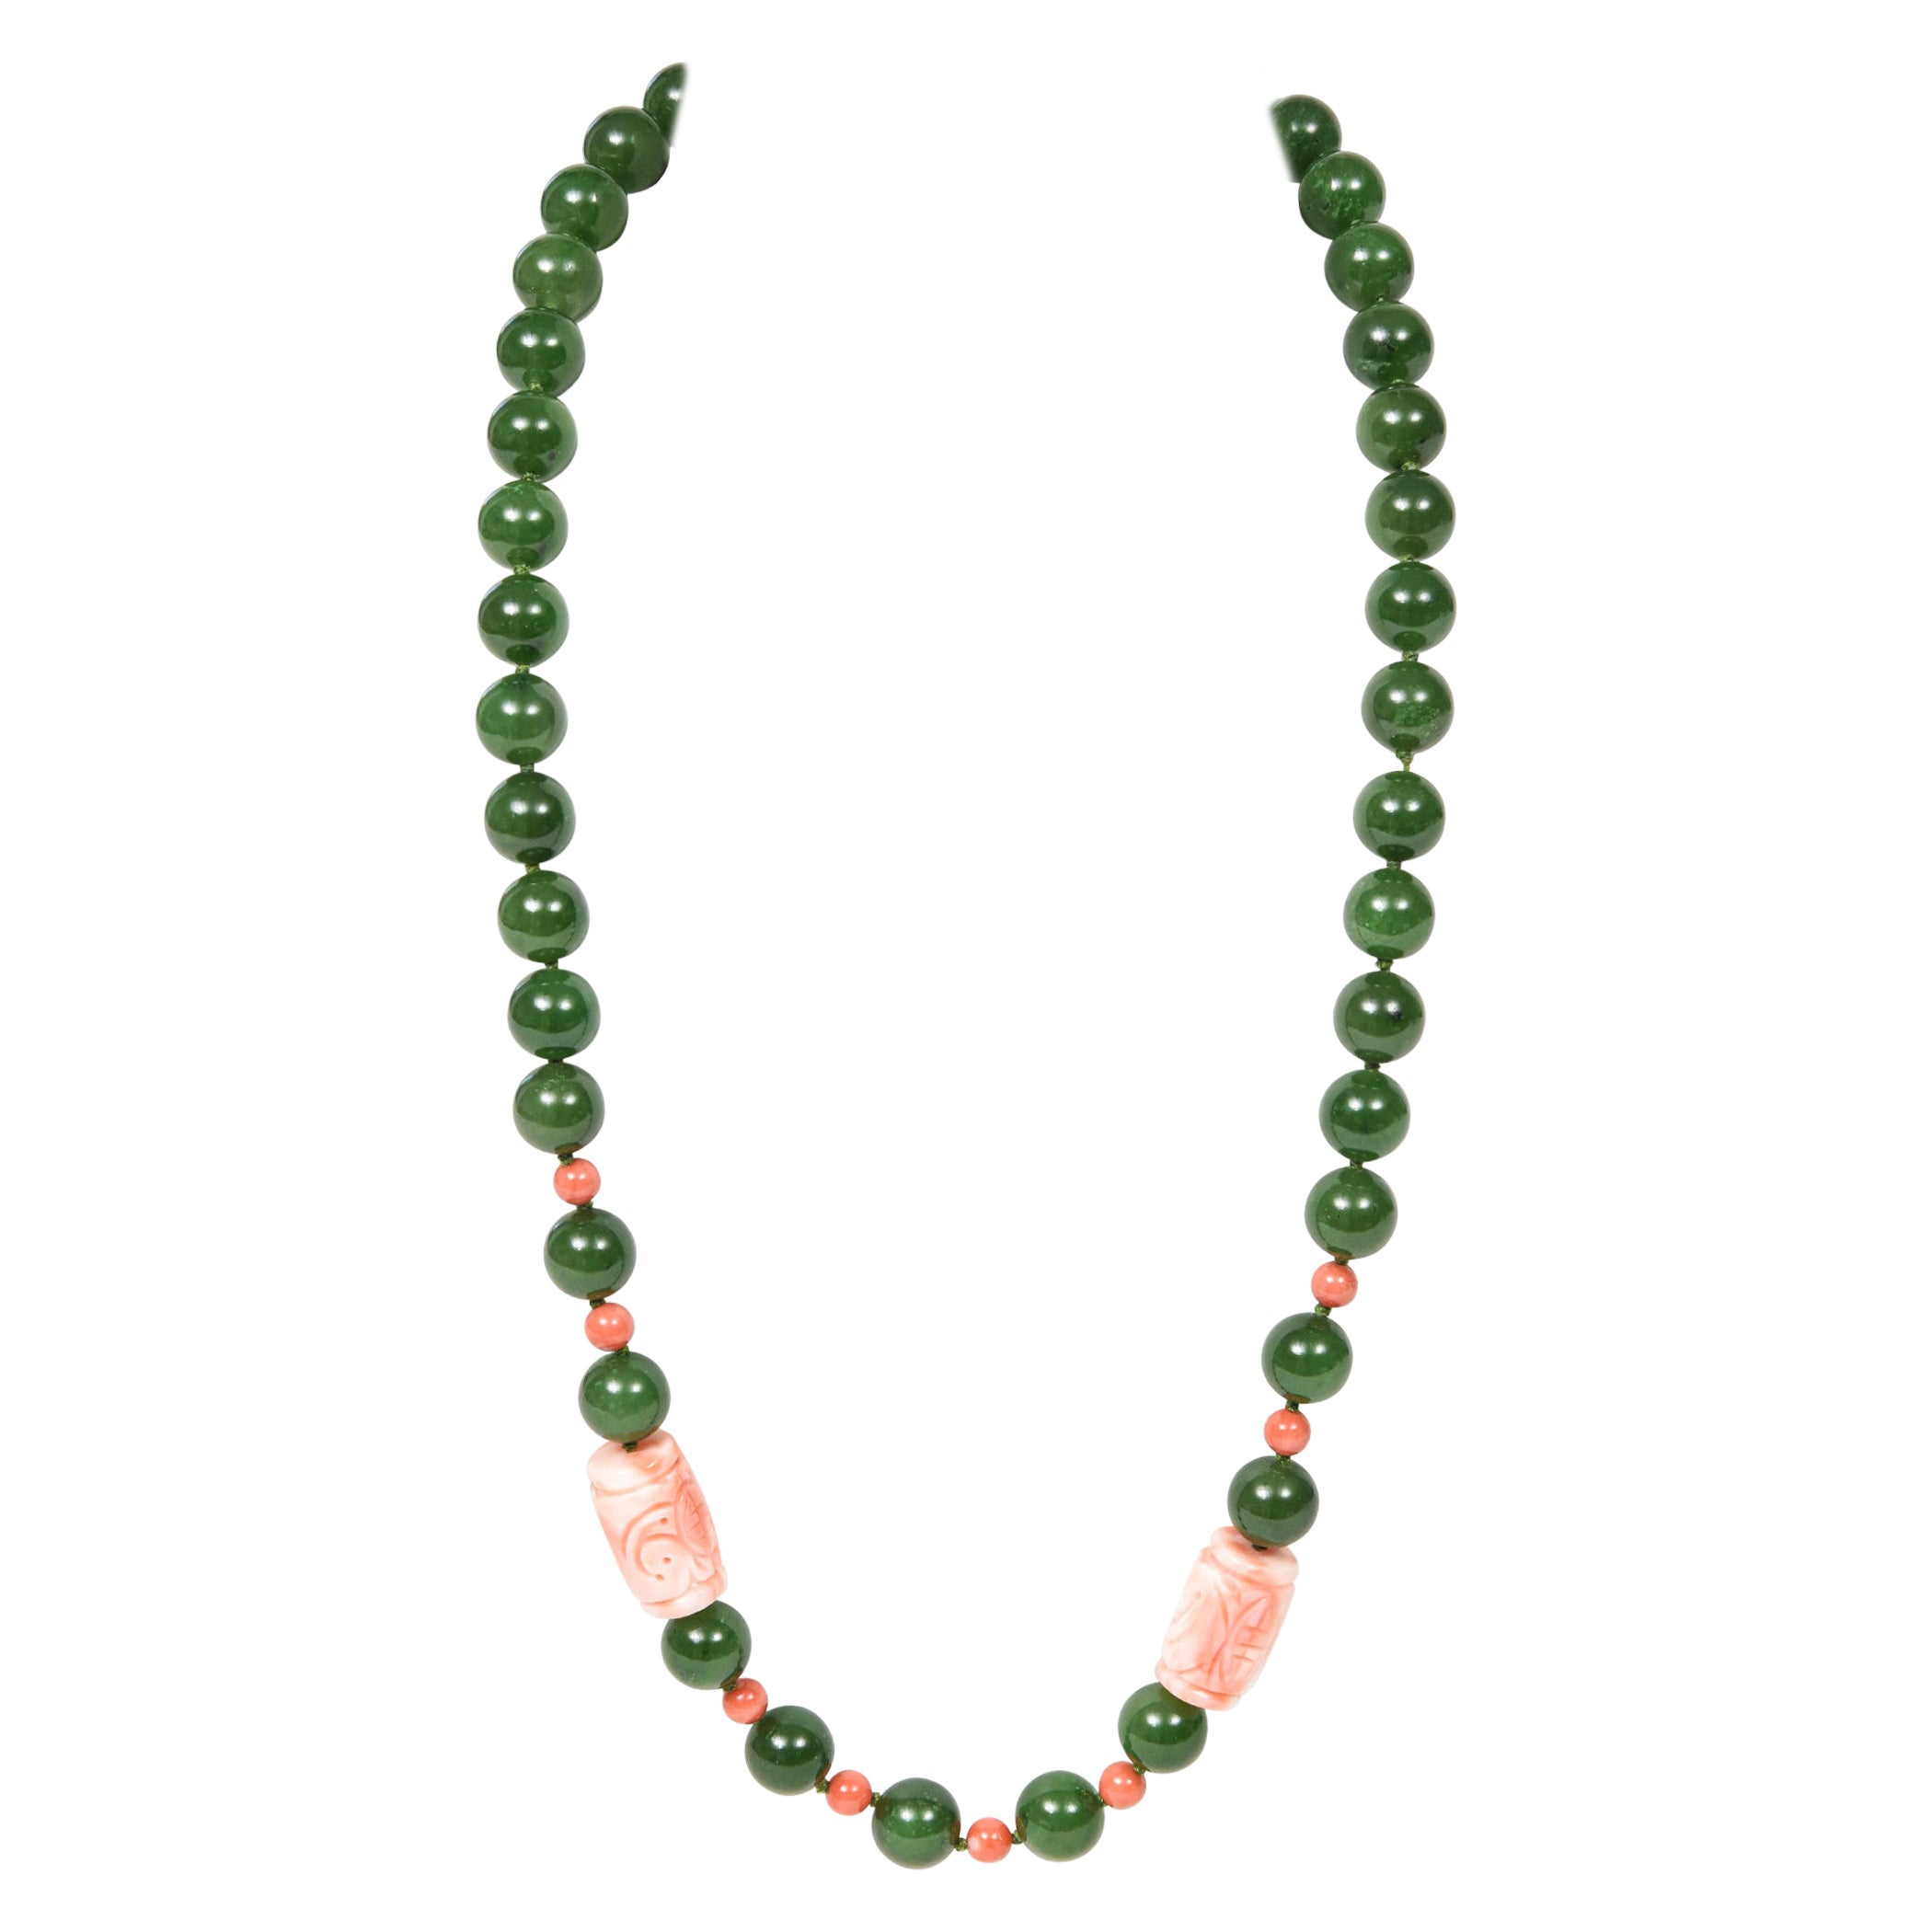 Mid 20th Century Chinese Jade and Carved Coral Bead Necklace With Silver Flower 